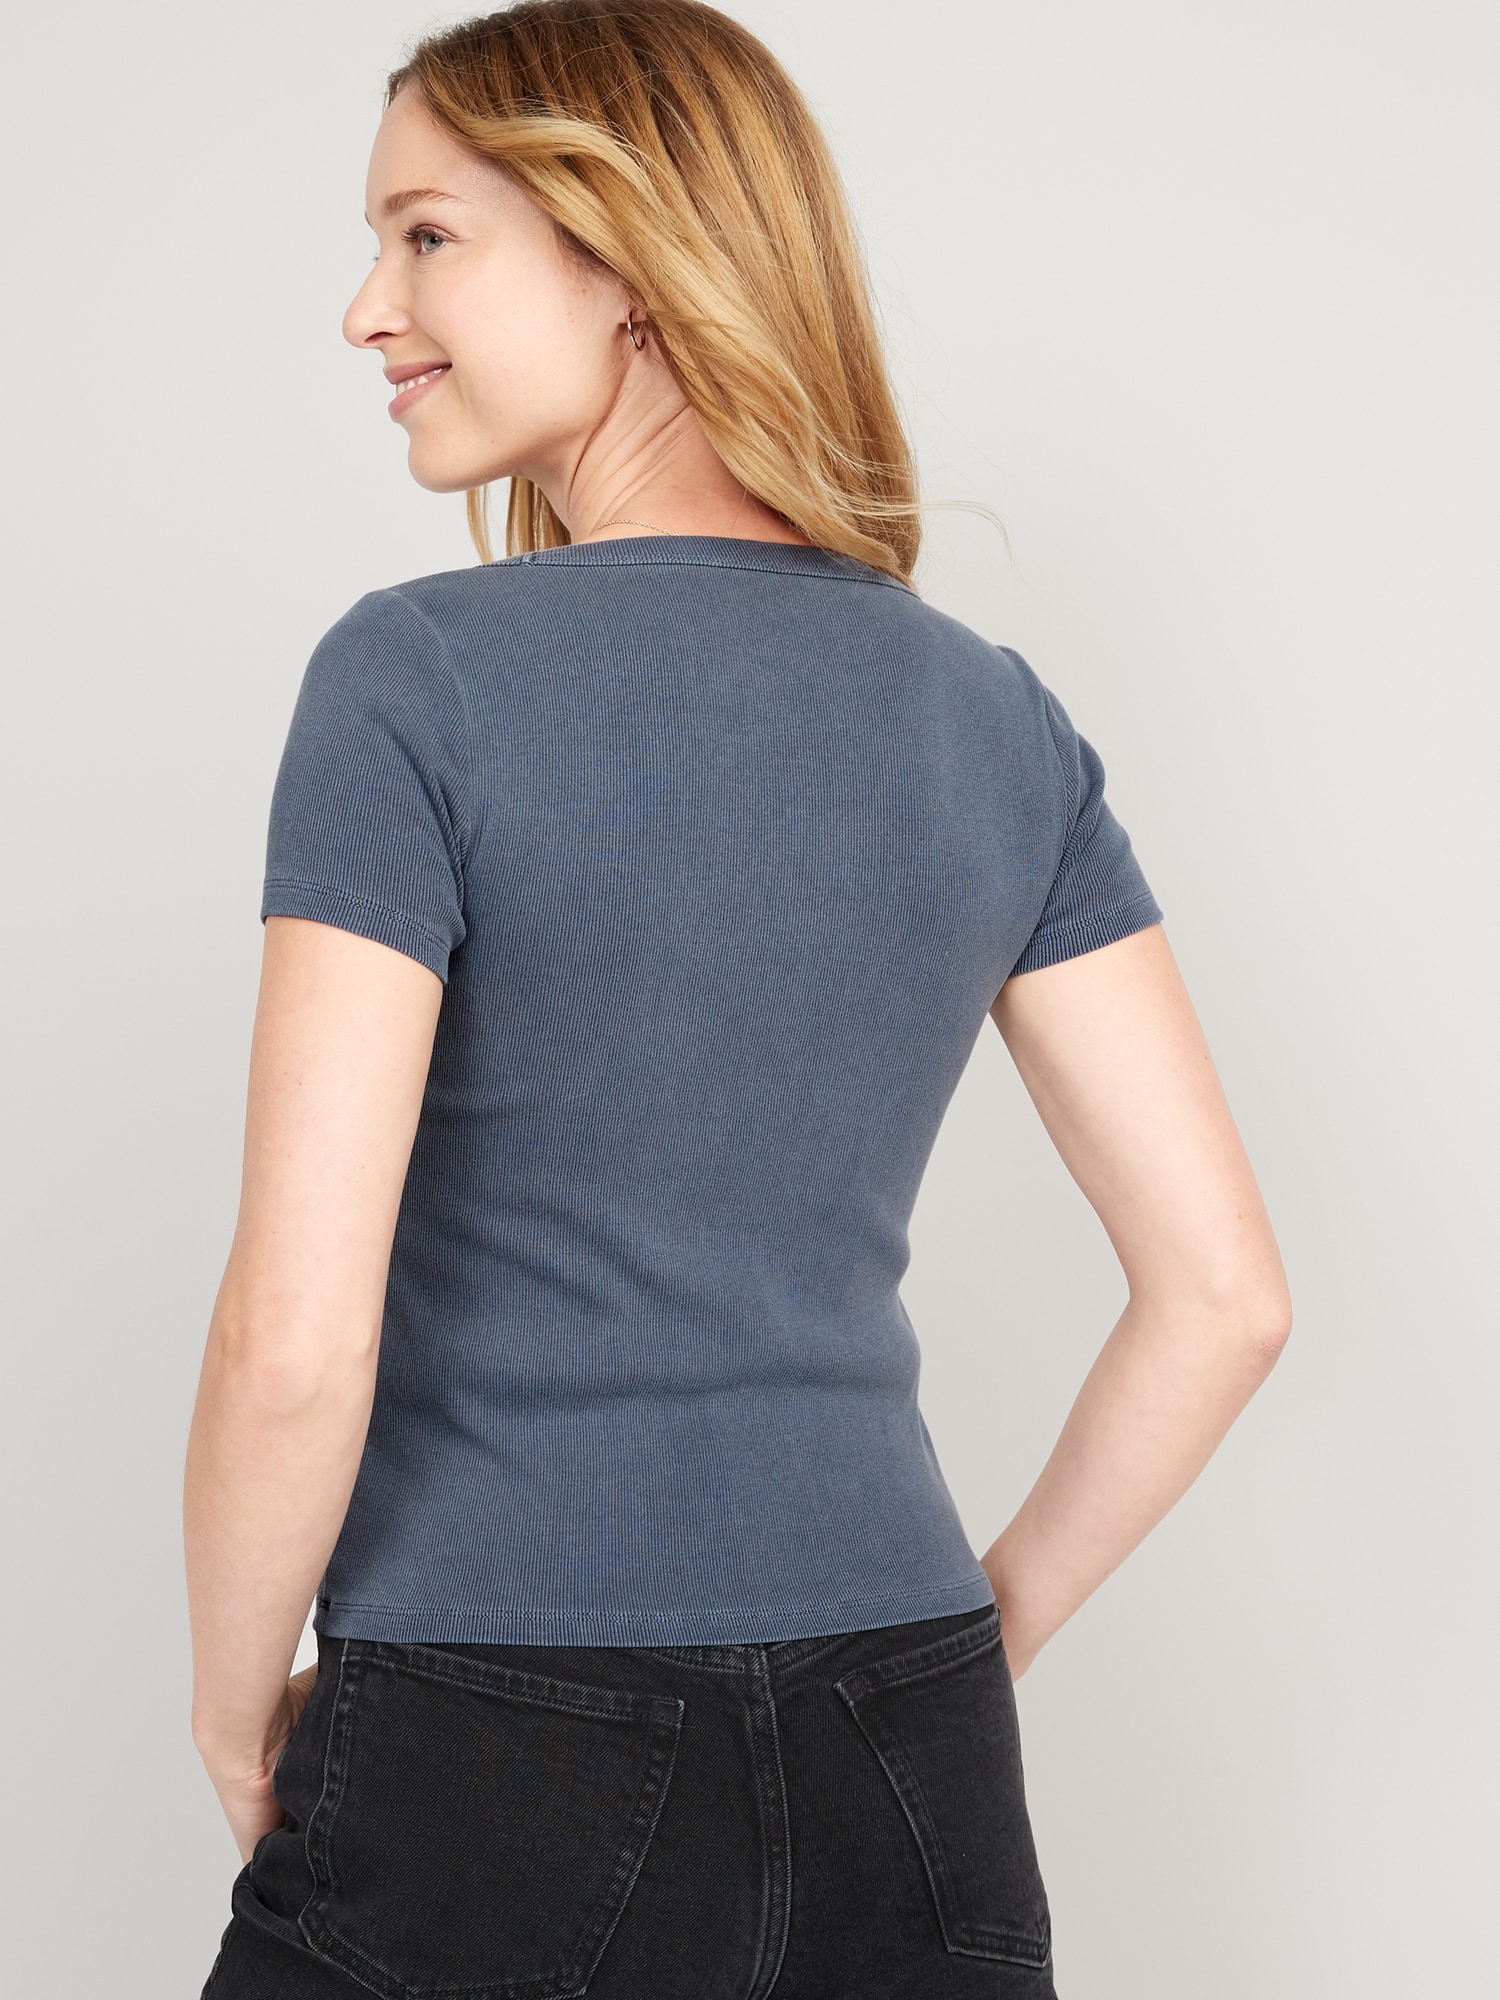 Fitted Short-Sleeve Scoop-Neck Rib-Knit T-Shirt for Women | Old Navy